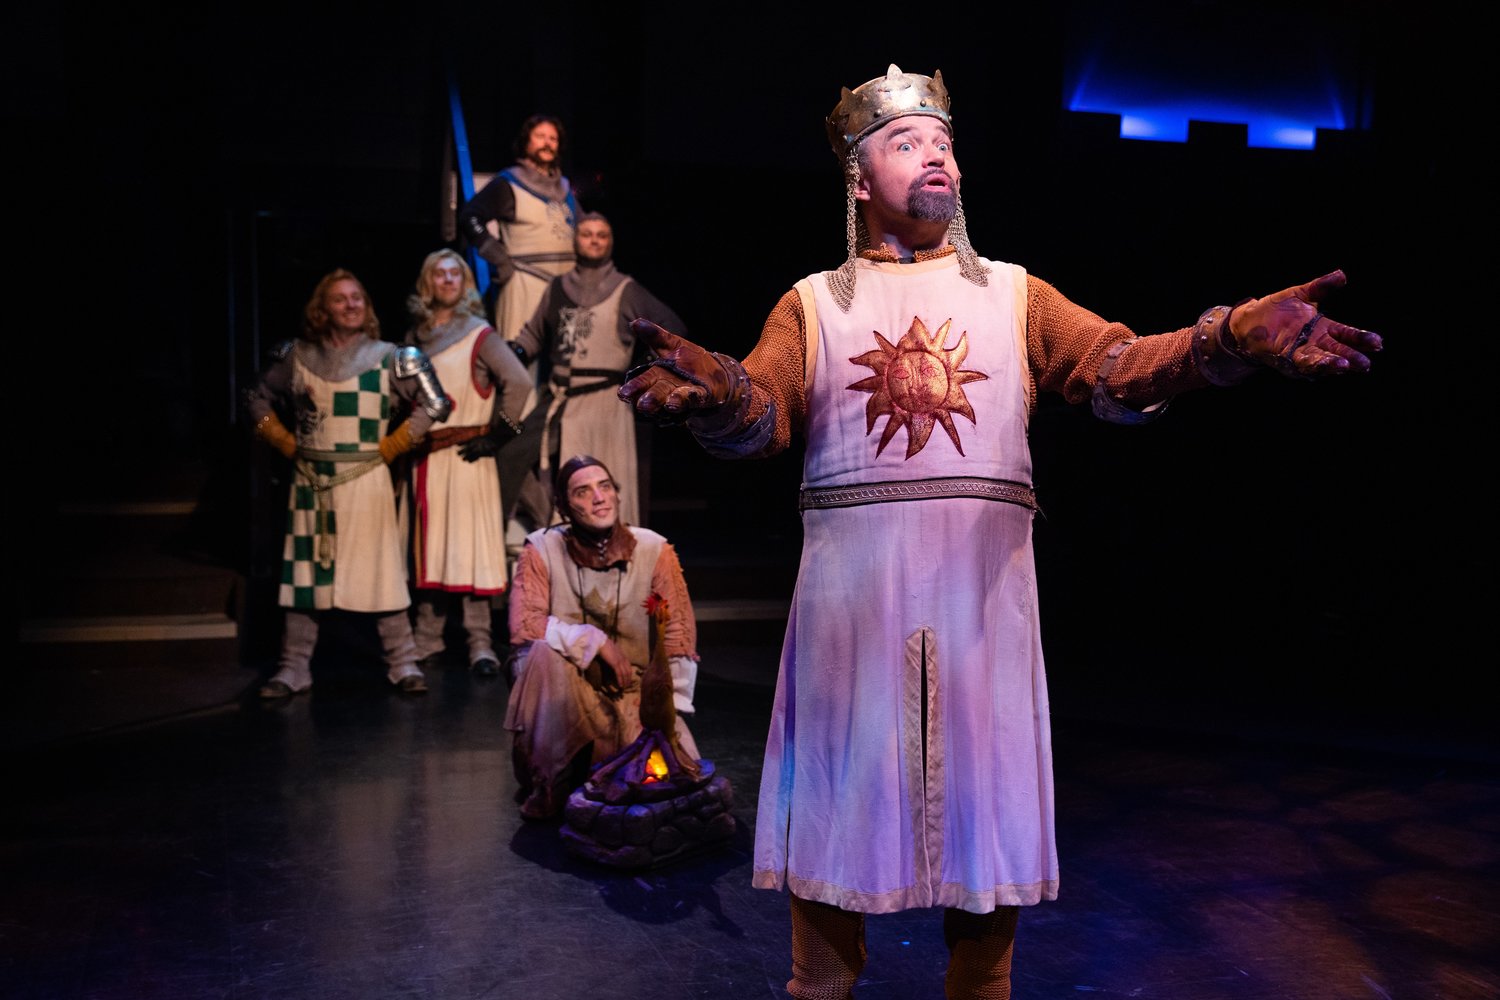 Alan Hoffman is King Arthur in the Toby’s production of “Spamalot,” playing now through March 20.